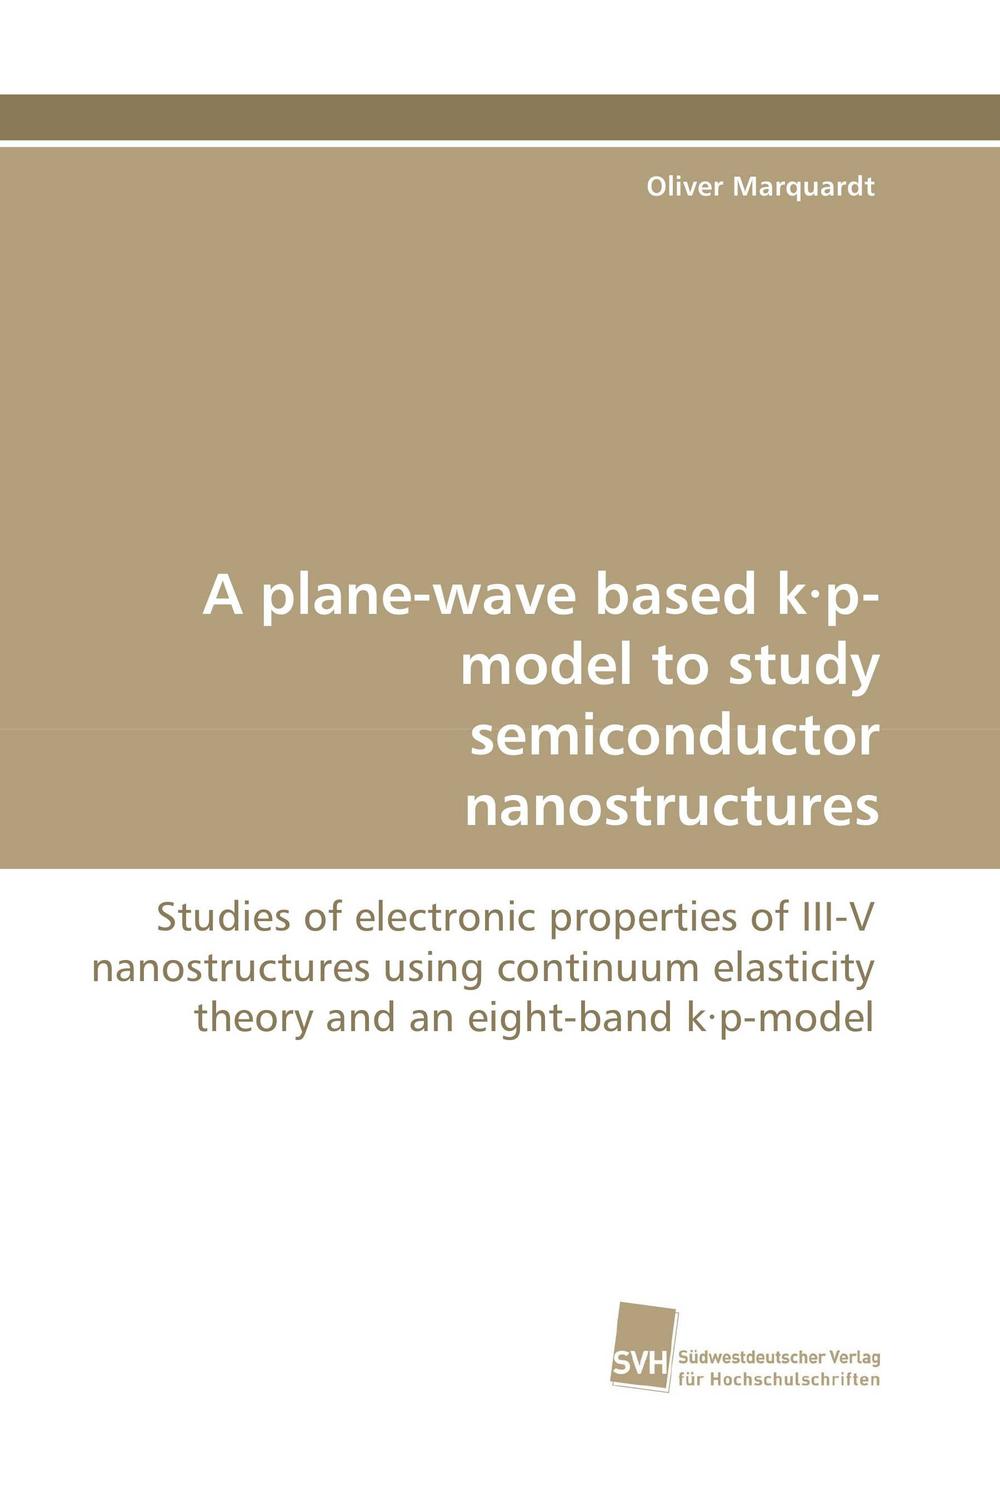 A plane-wave based k·p-model to study semiconductor nanostructures - Oliver Marquardt